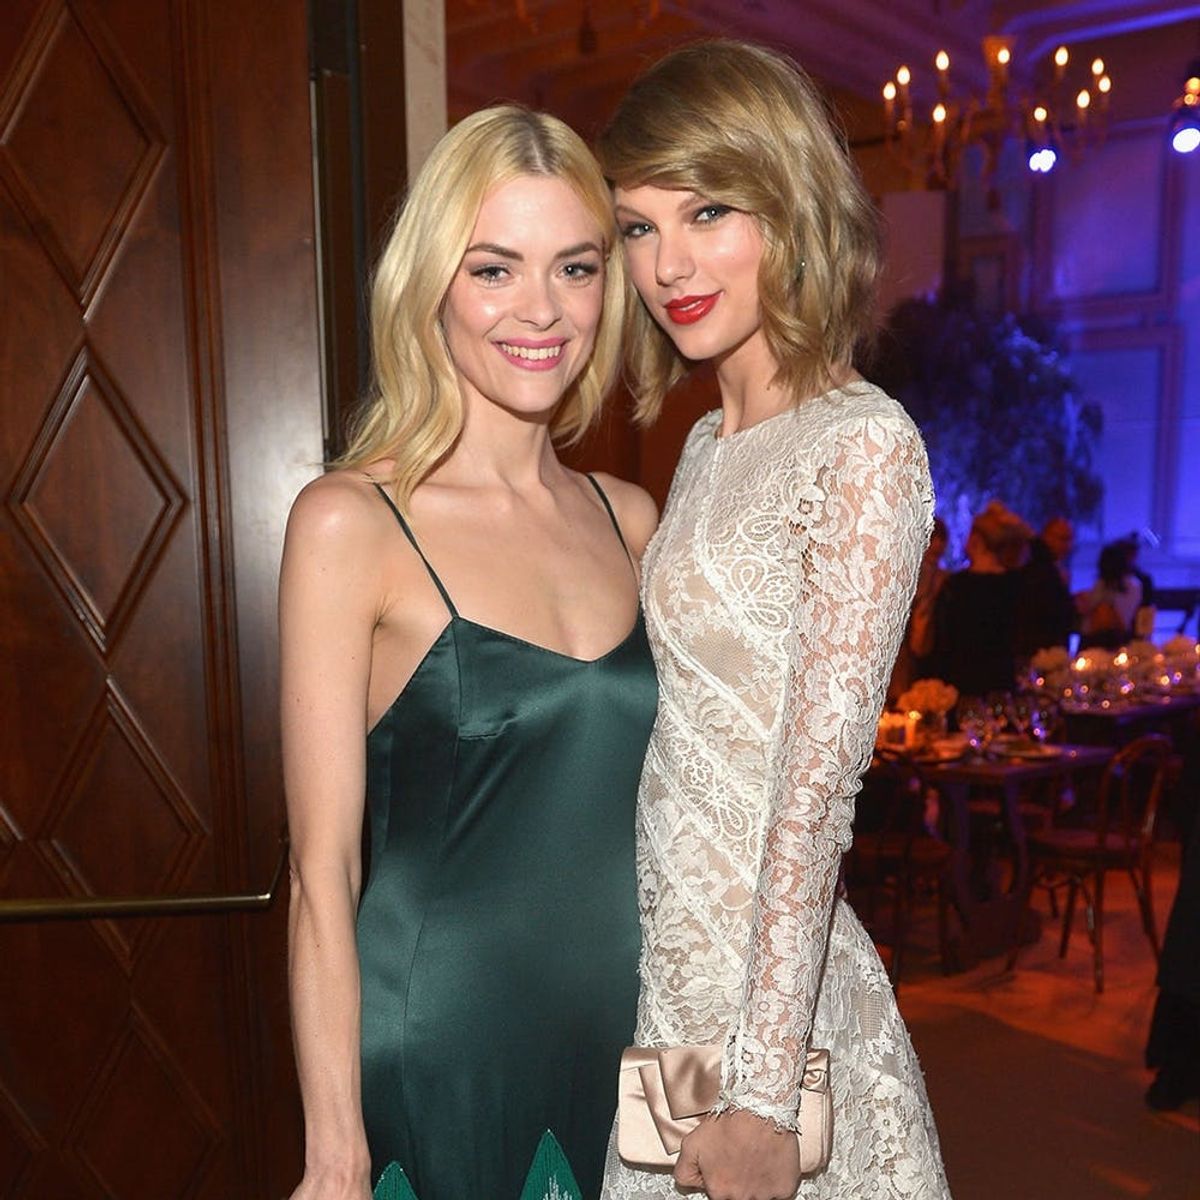 Did Taylor Swift Just Kick Off a New Baby Announcement Trend?